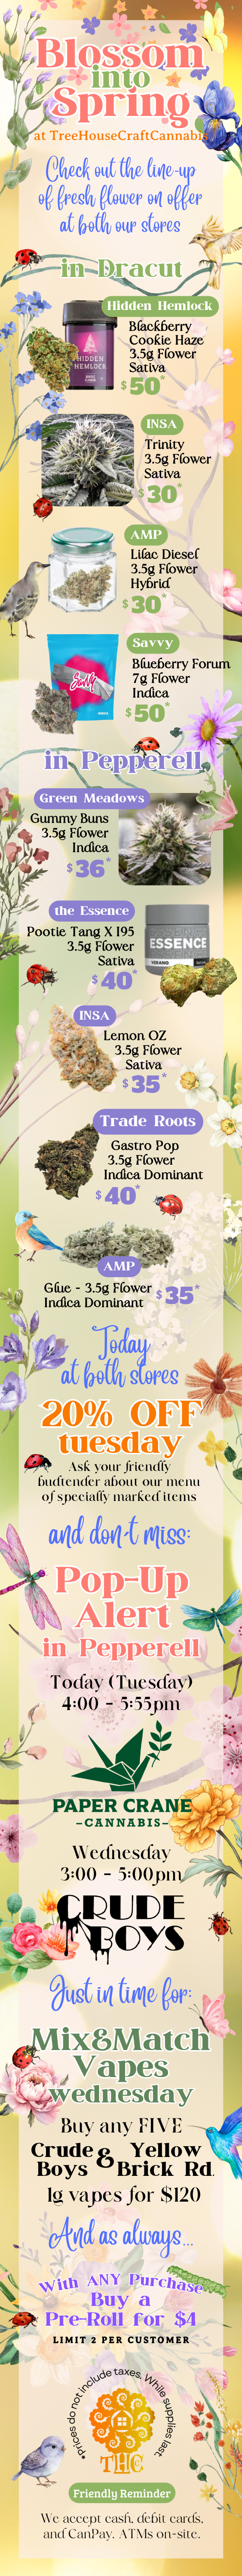 Treehouse deals and flower selection